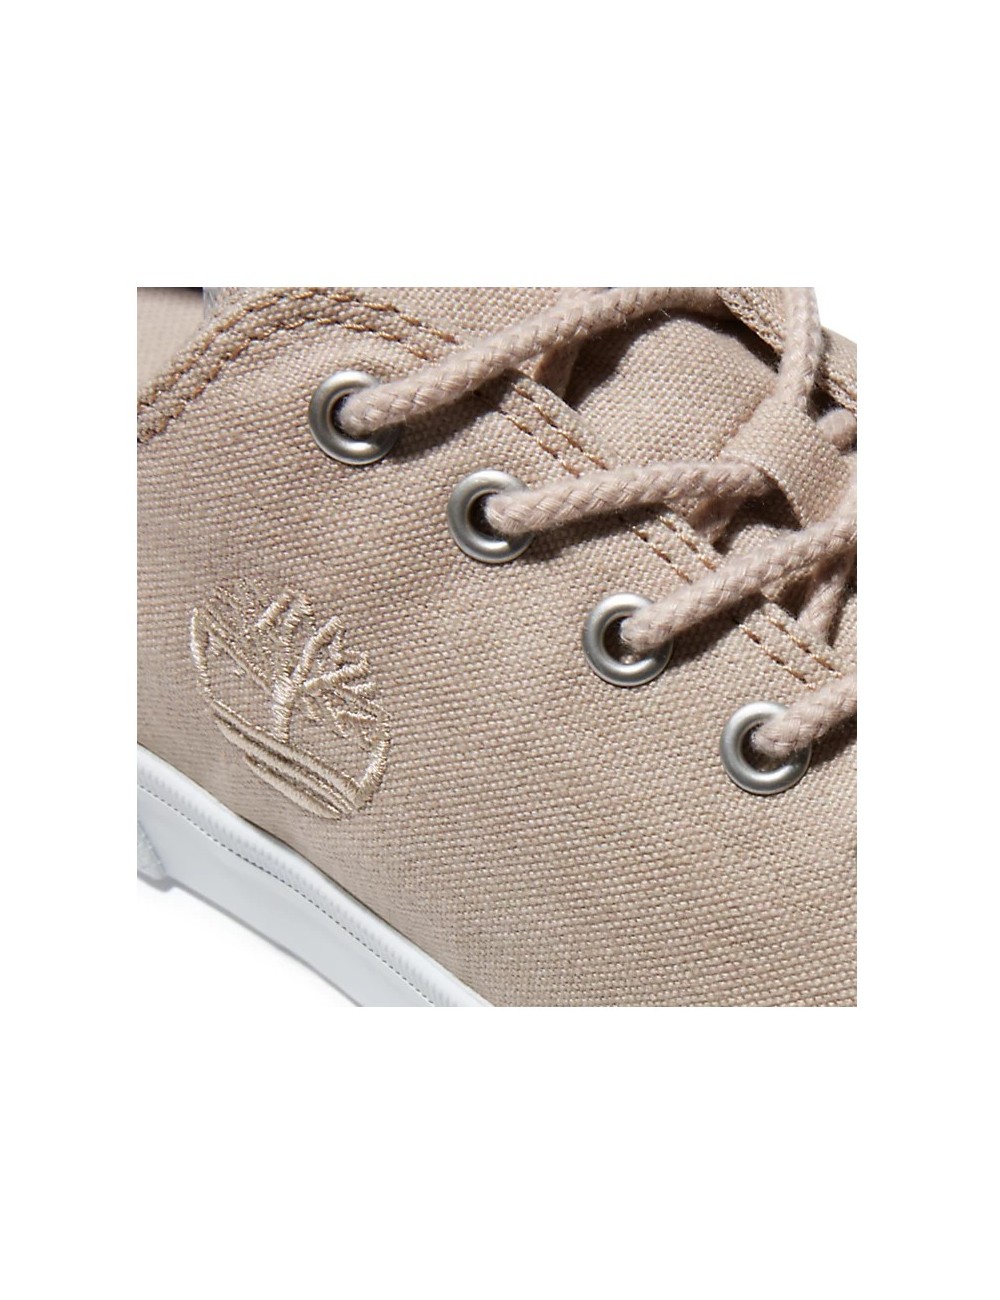 MEN'S SNEAKERS TIMBERLAND UNION WHARF 2.0 BEIGE